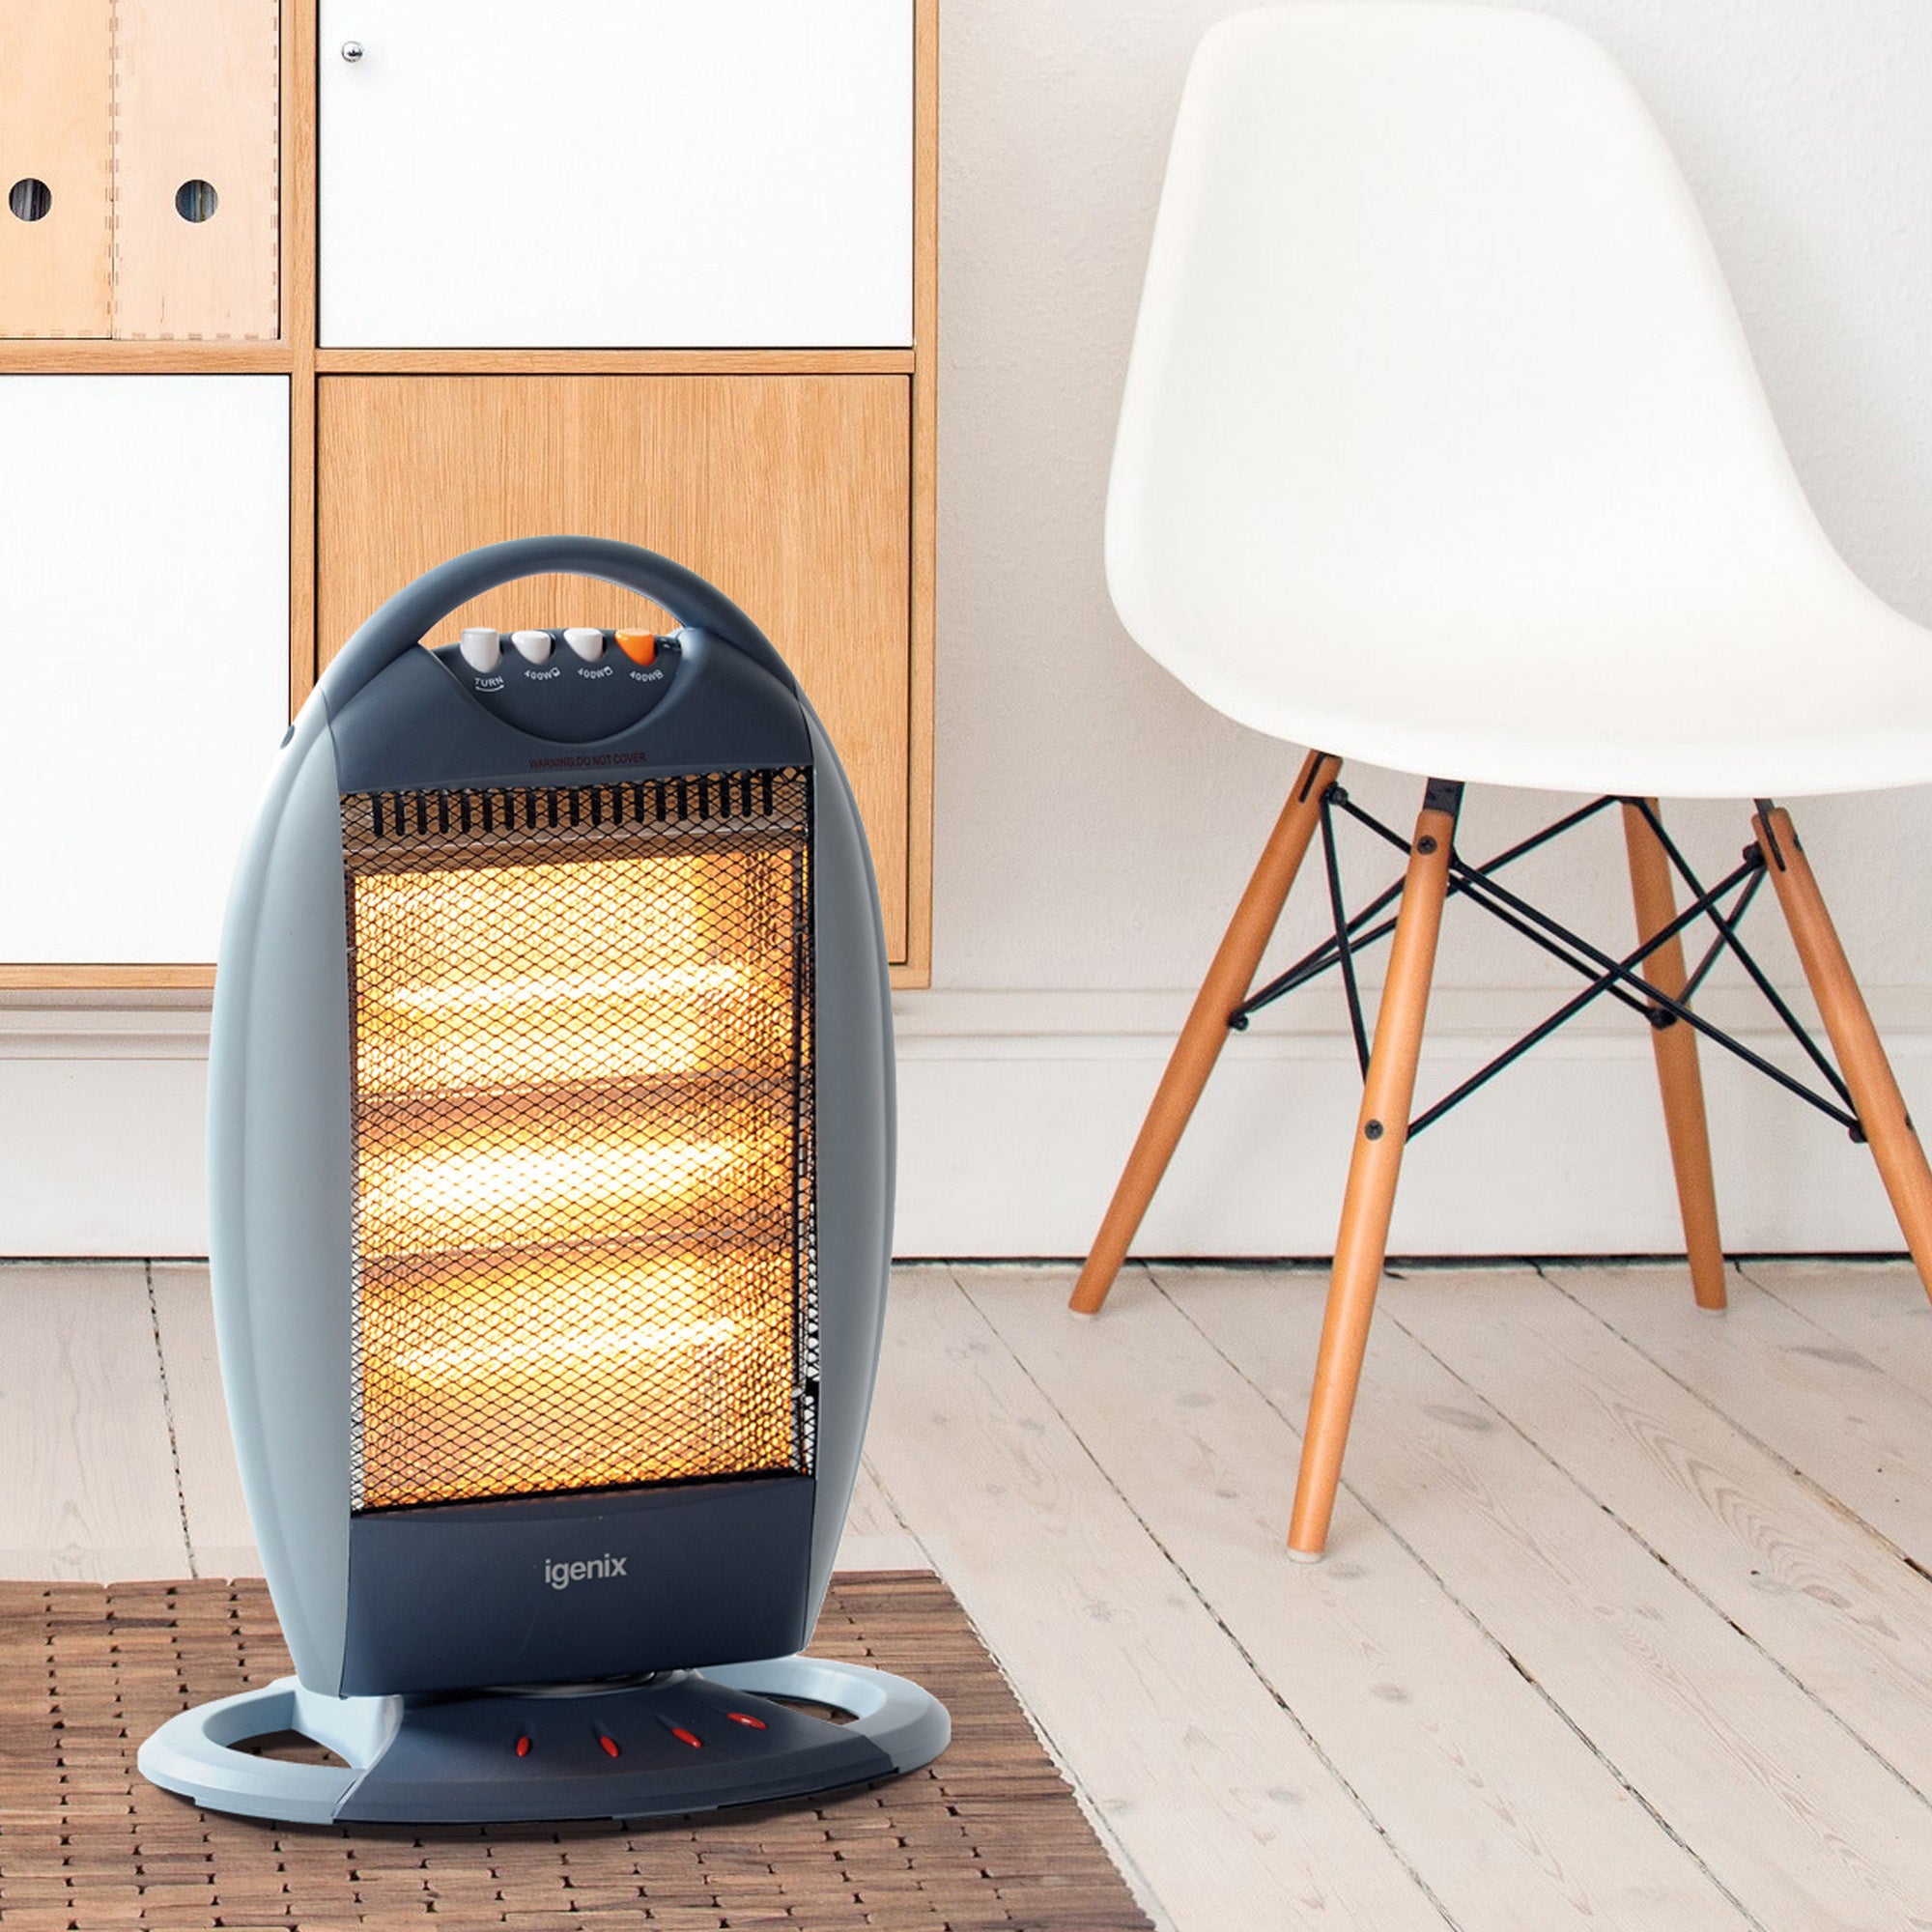 What size heater do I need for my room?